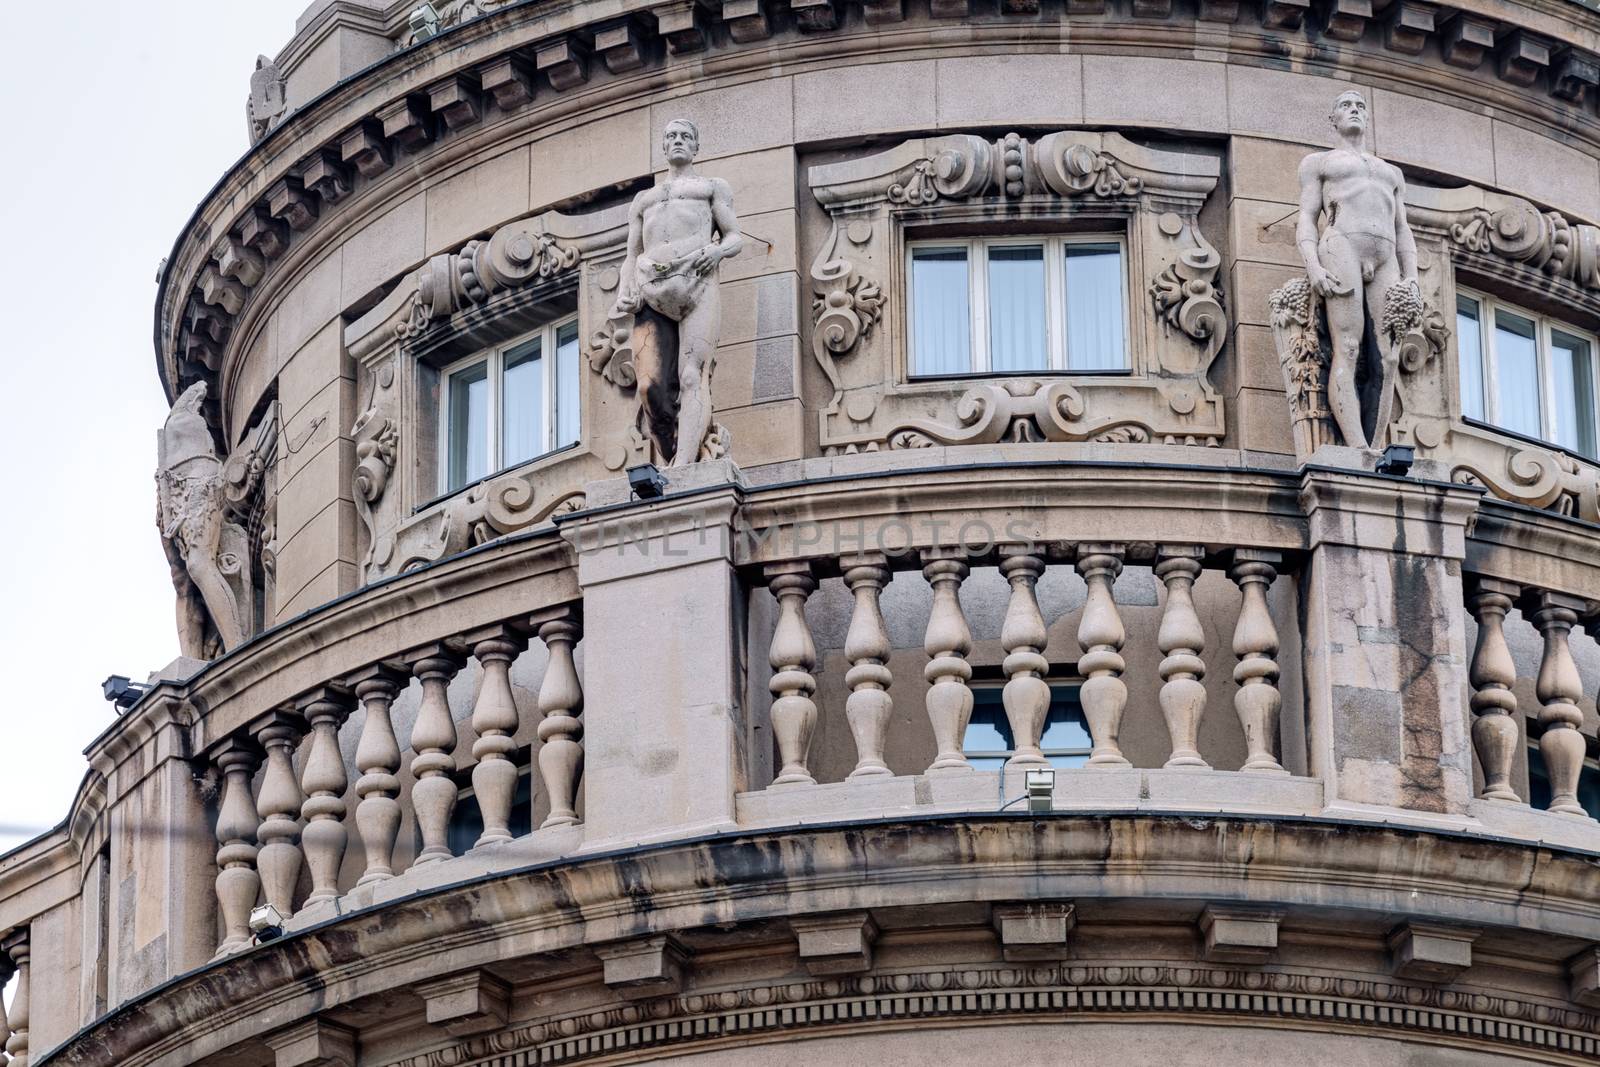 Details of stone facade with ornaments and statues